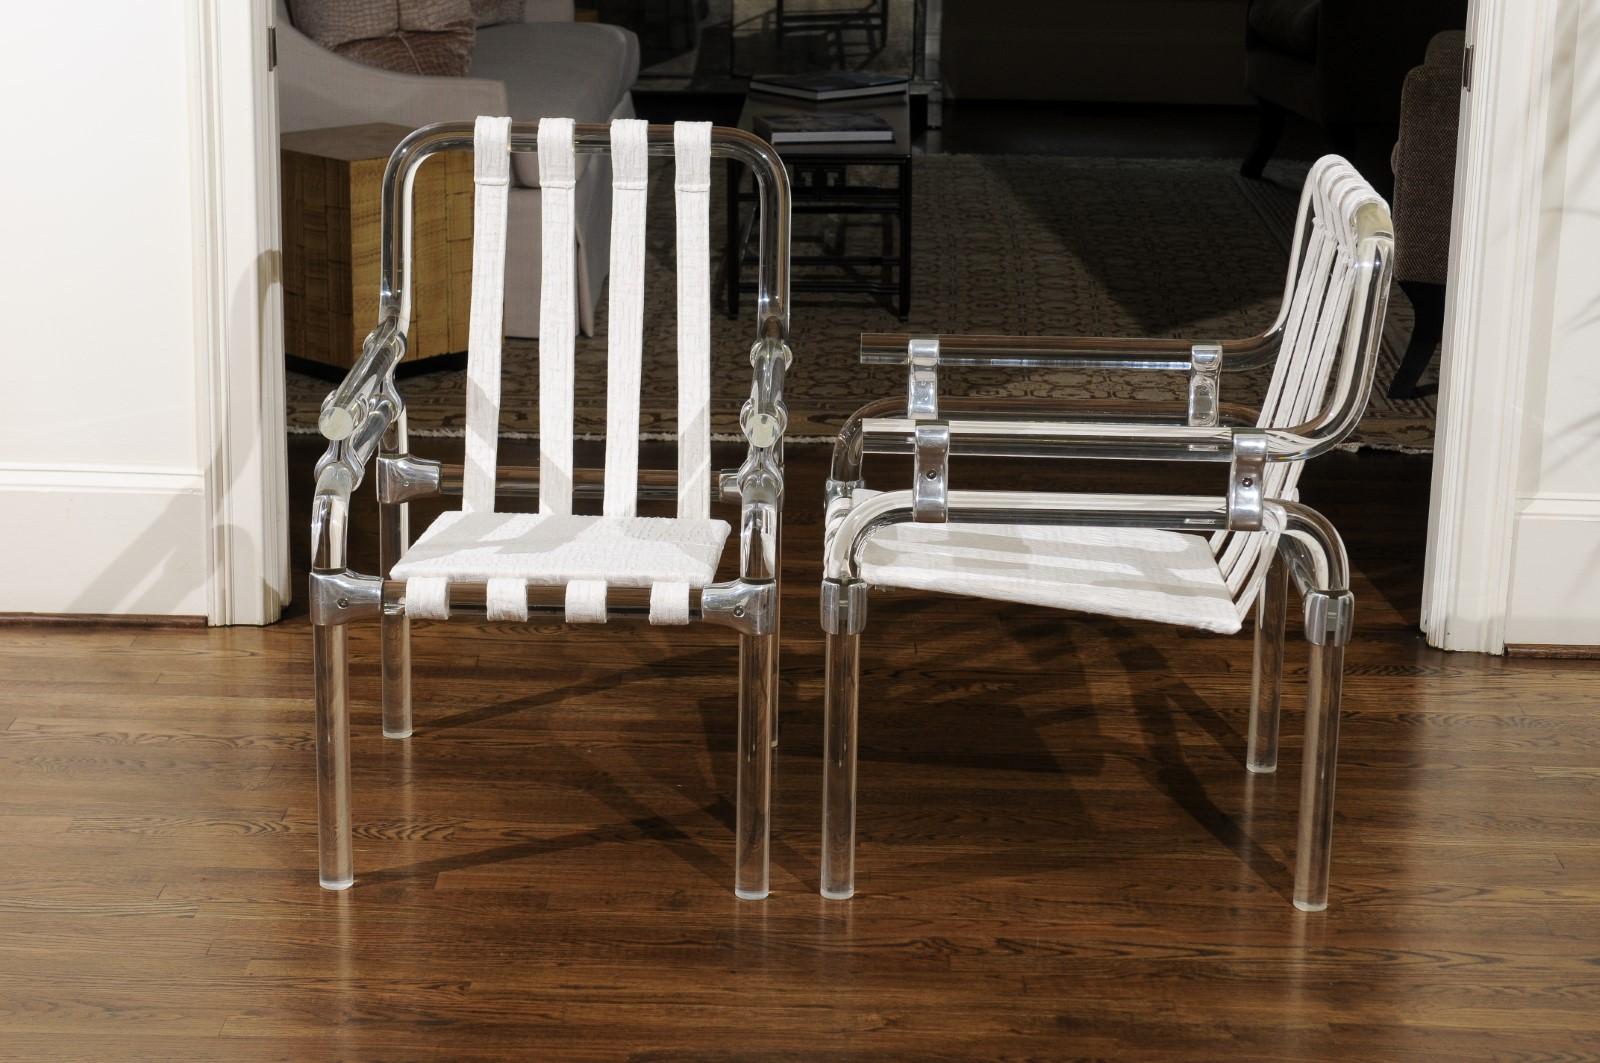 Staggering Set of 8 Lucite Arm Dining Chairs by Jeff Messerschmidt, 1985 For Sale 8